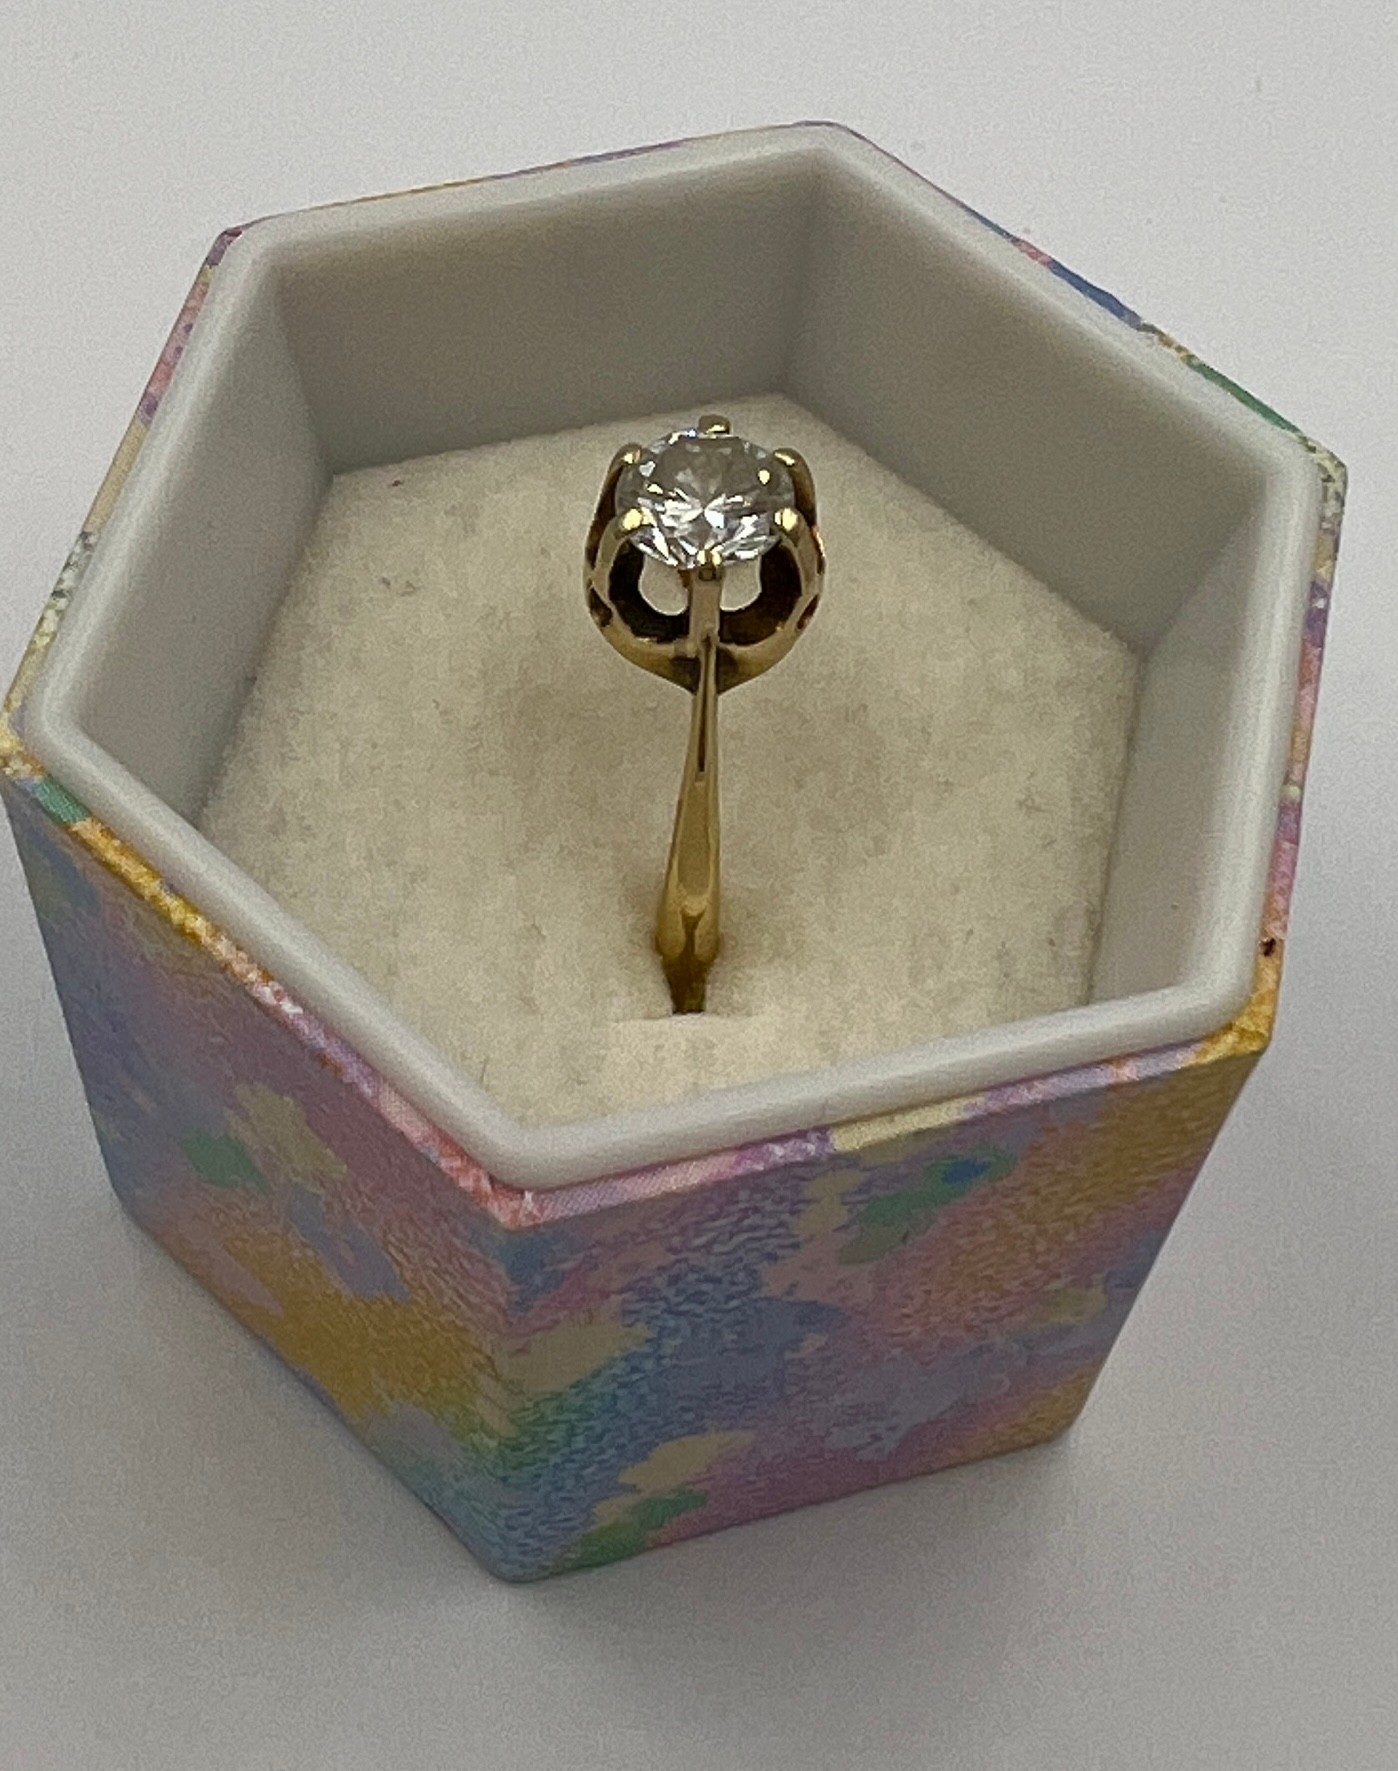 A solitaire diamond ring, 0.84ct approx, set in 18 carat yellow gold. Size J. Weight 2.9gm. - Image 3 of 4